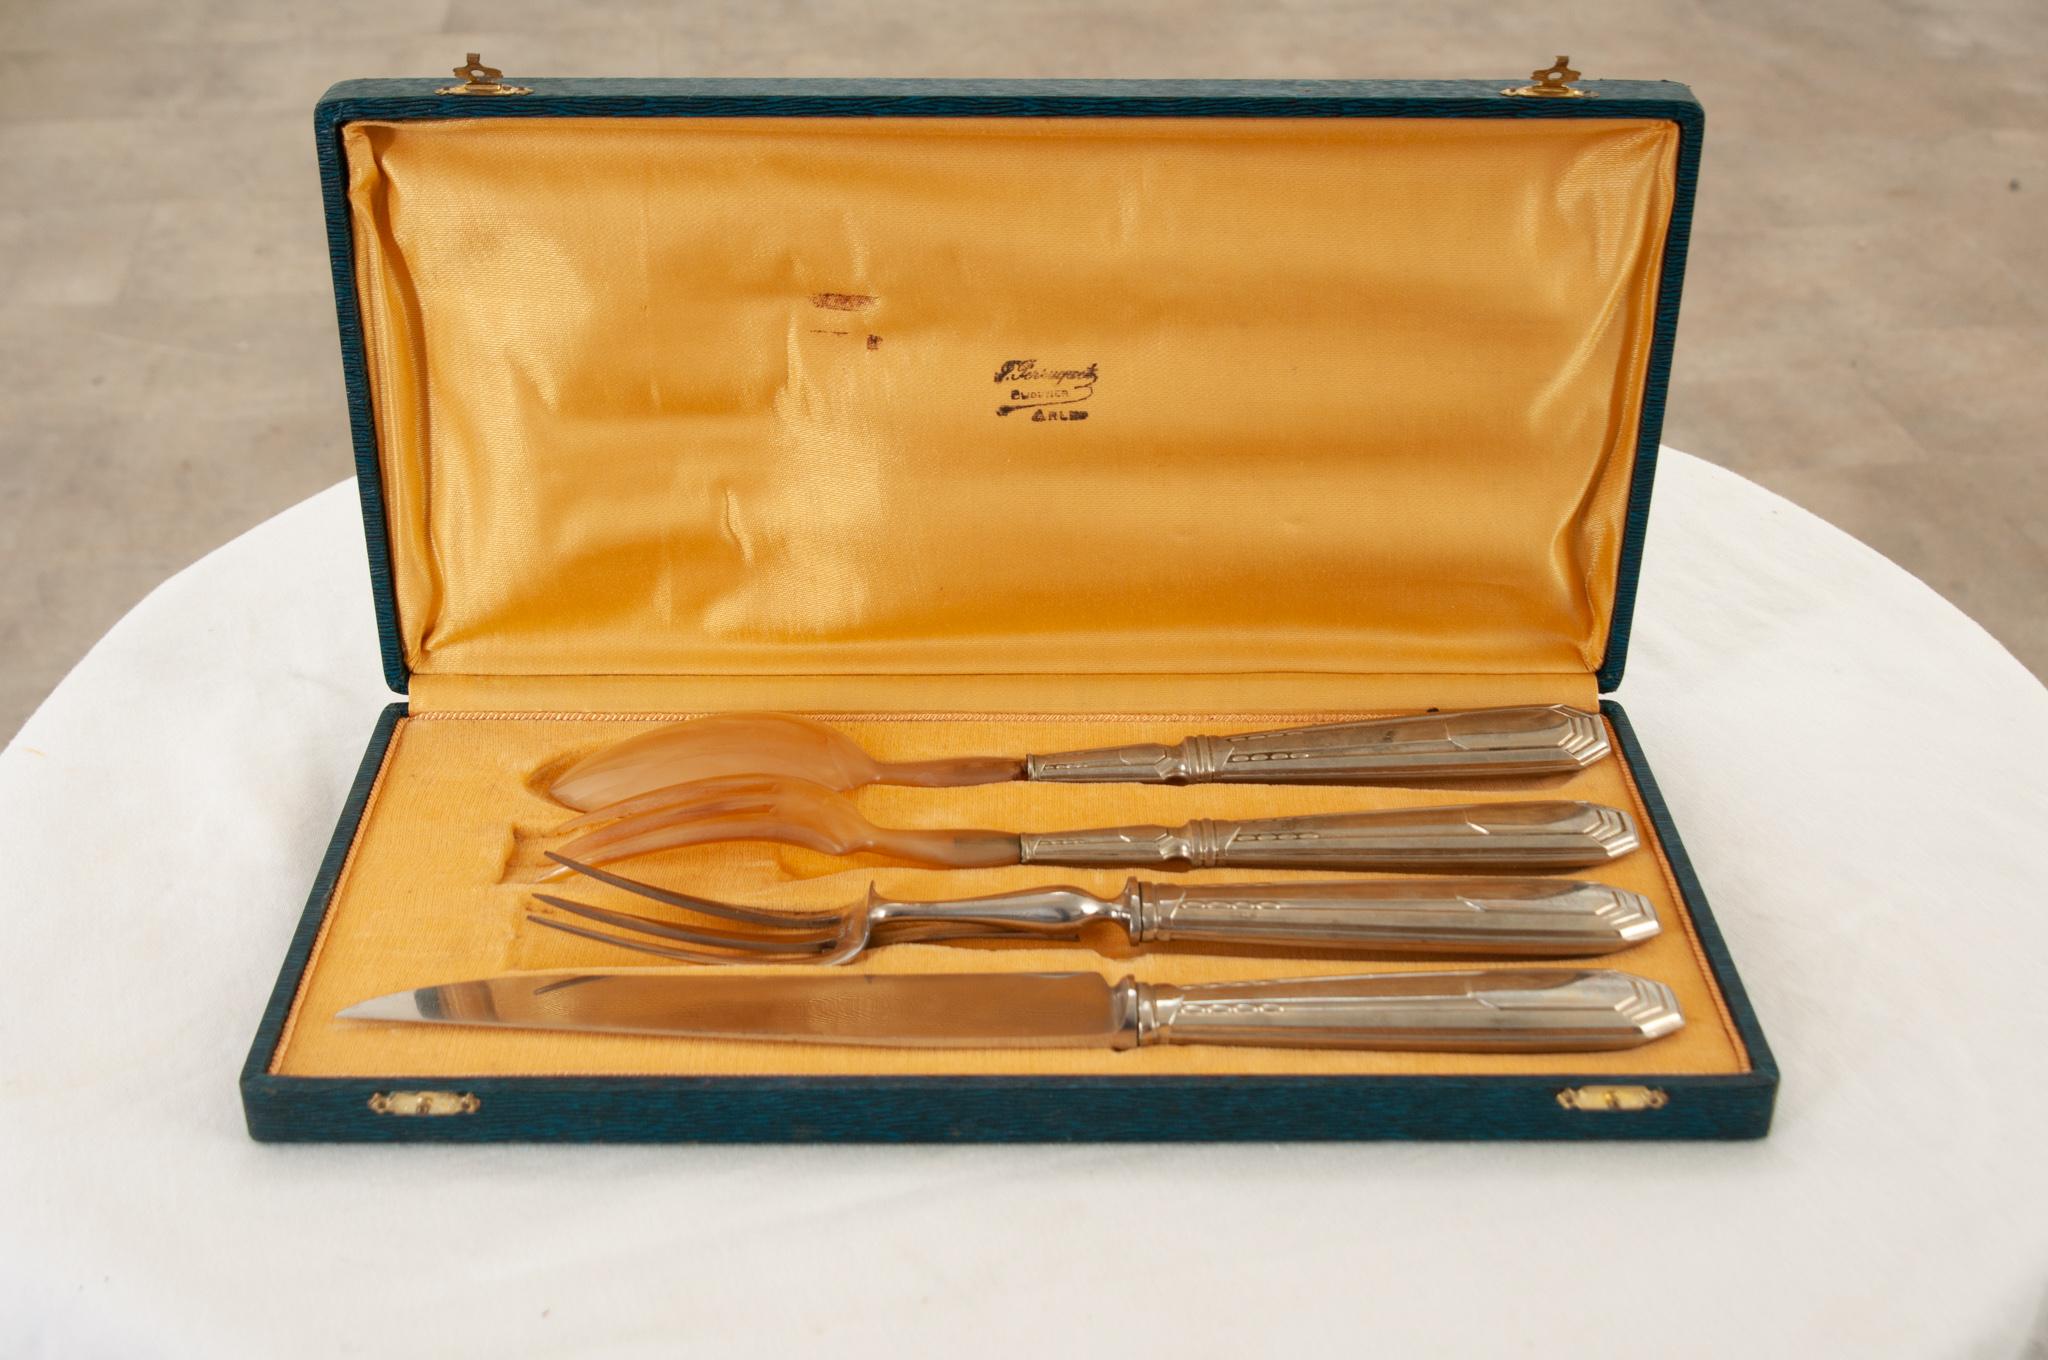 Encased in navy blue leather and protected by gold velvet, this set of 4 serving utensils includes a carving fork and knife and a salad serving fork and spoon. The carving knife has the maker's initials and the word “inoxydable” which means